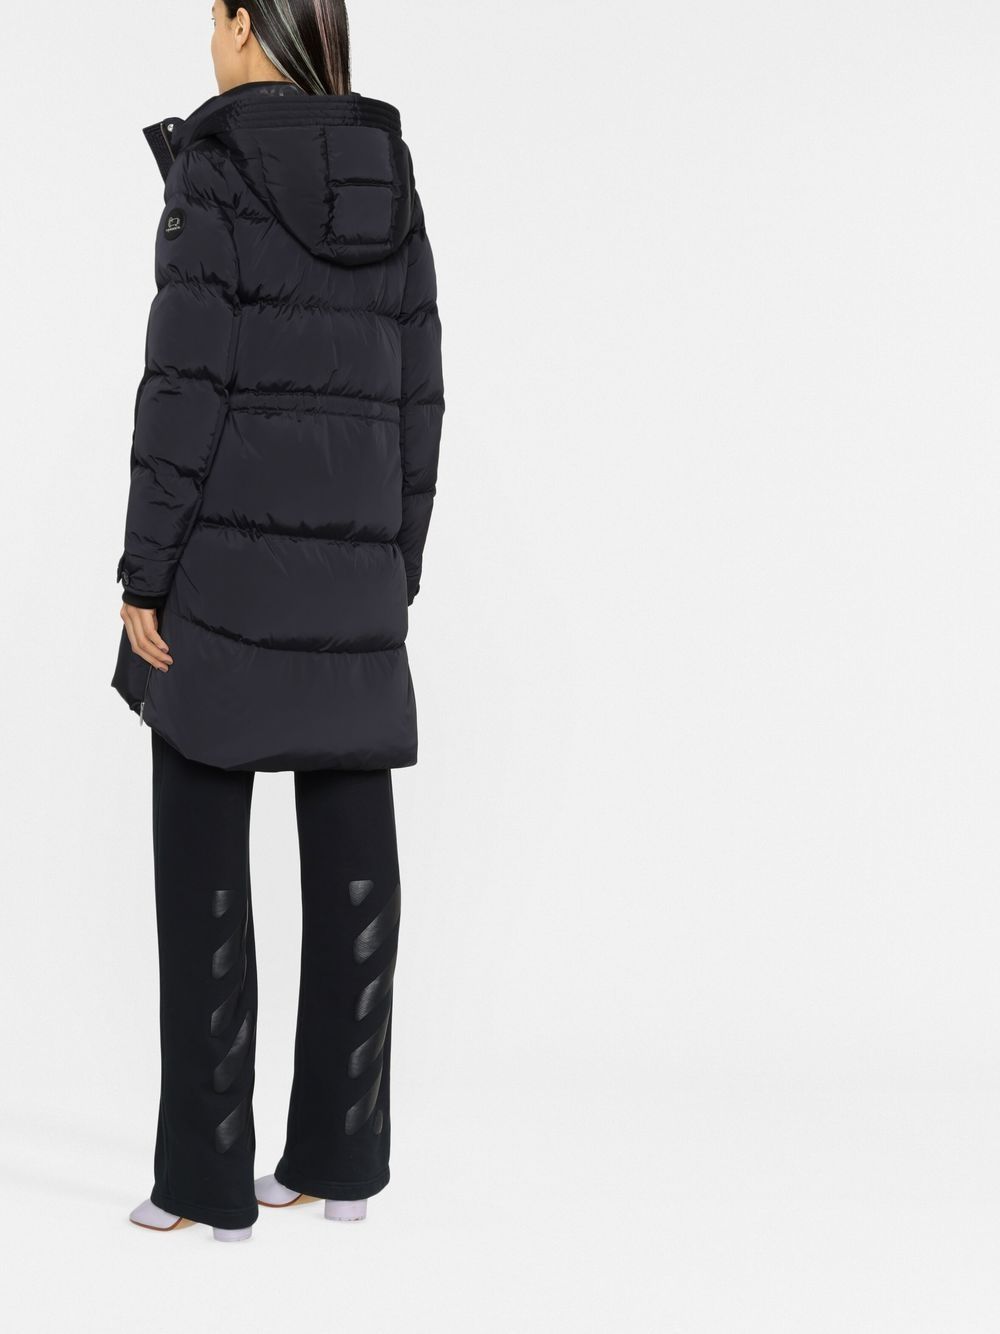 WOOLRICH Black Down Puffer Jacket with Hood for Women - FW23 Collection